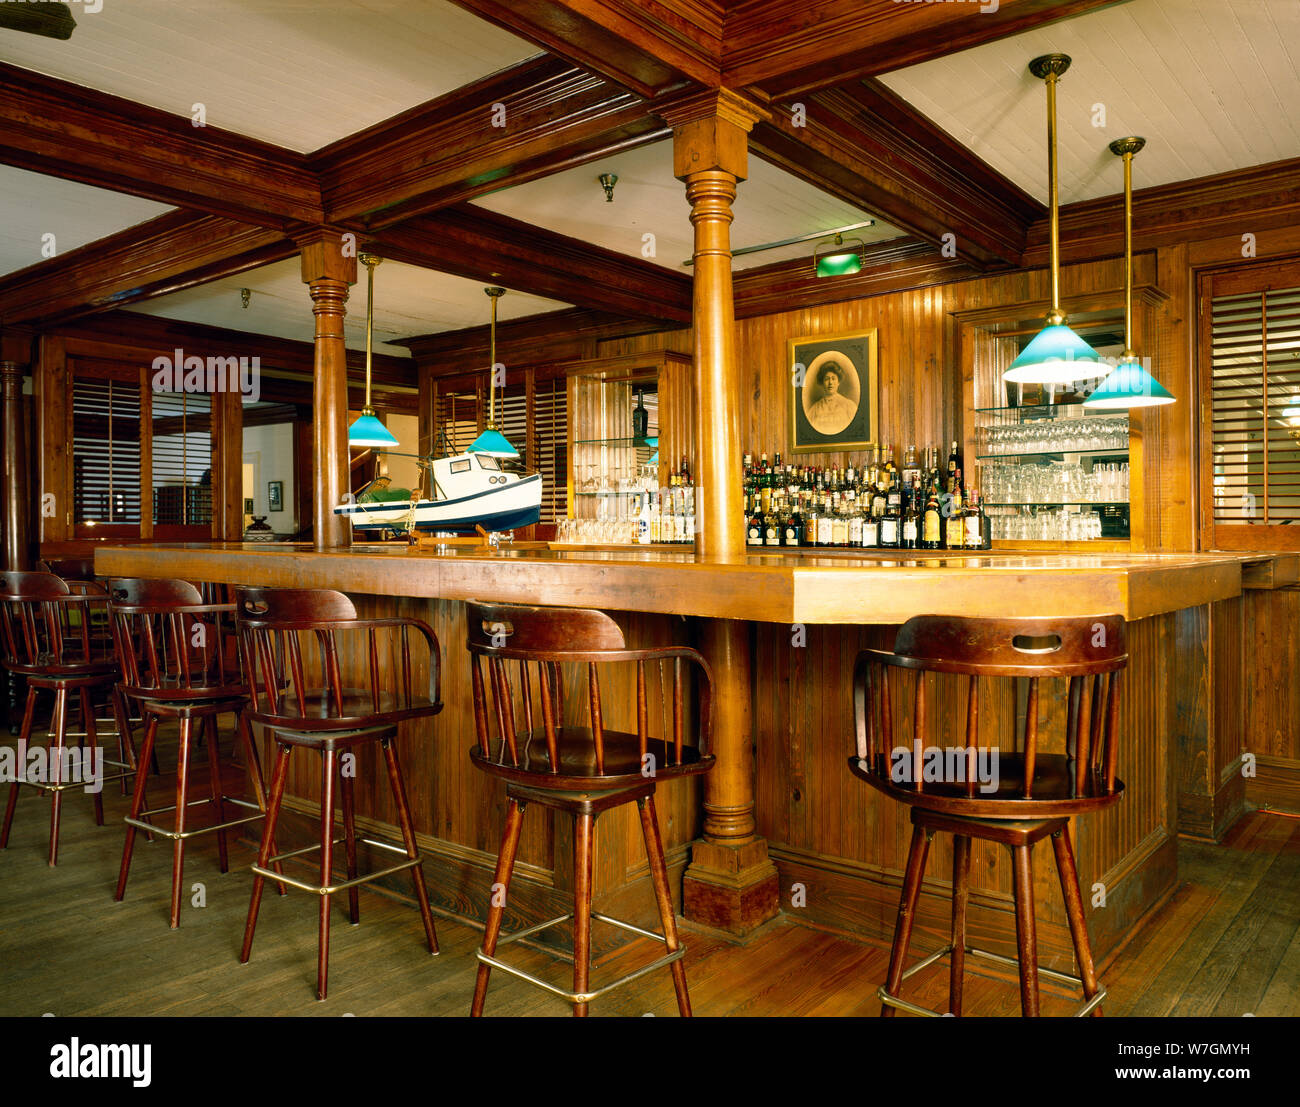 Bar At The Gibson Inn A Favorite Florida Panhandle Watering Hole At The Hotel In Apalachicola Florida Stock Photo Alamy